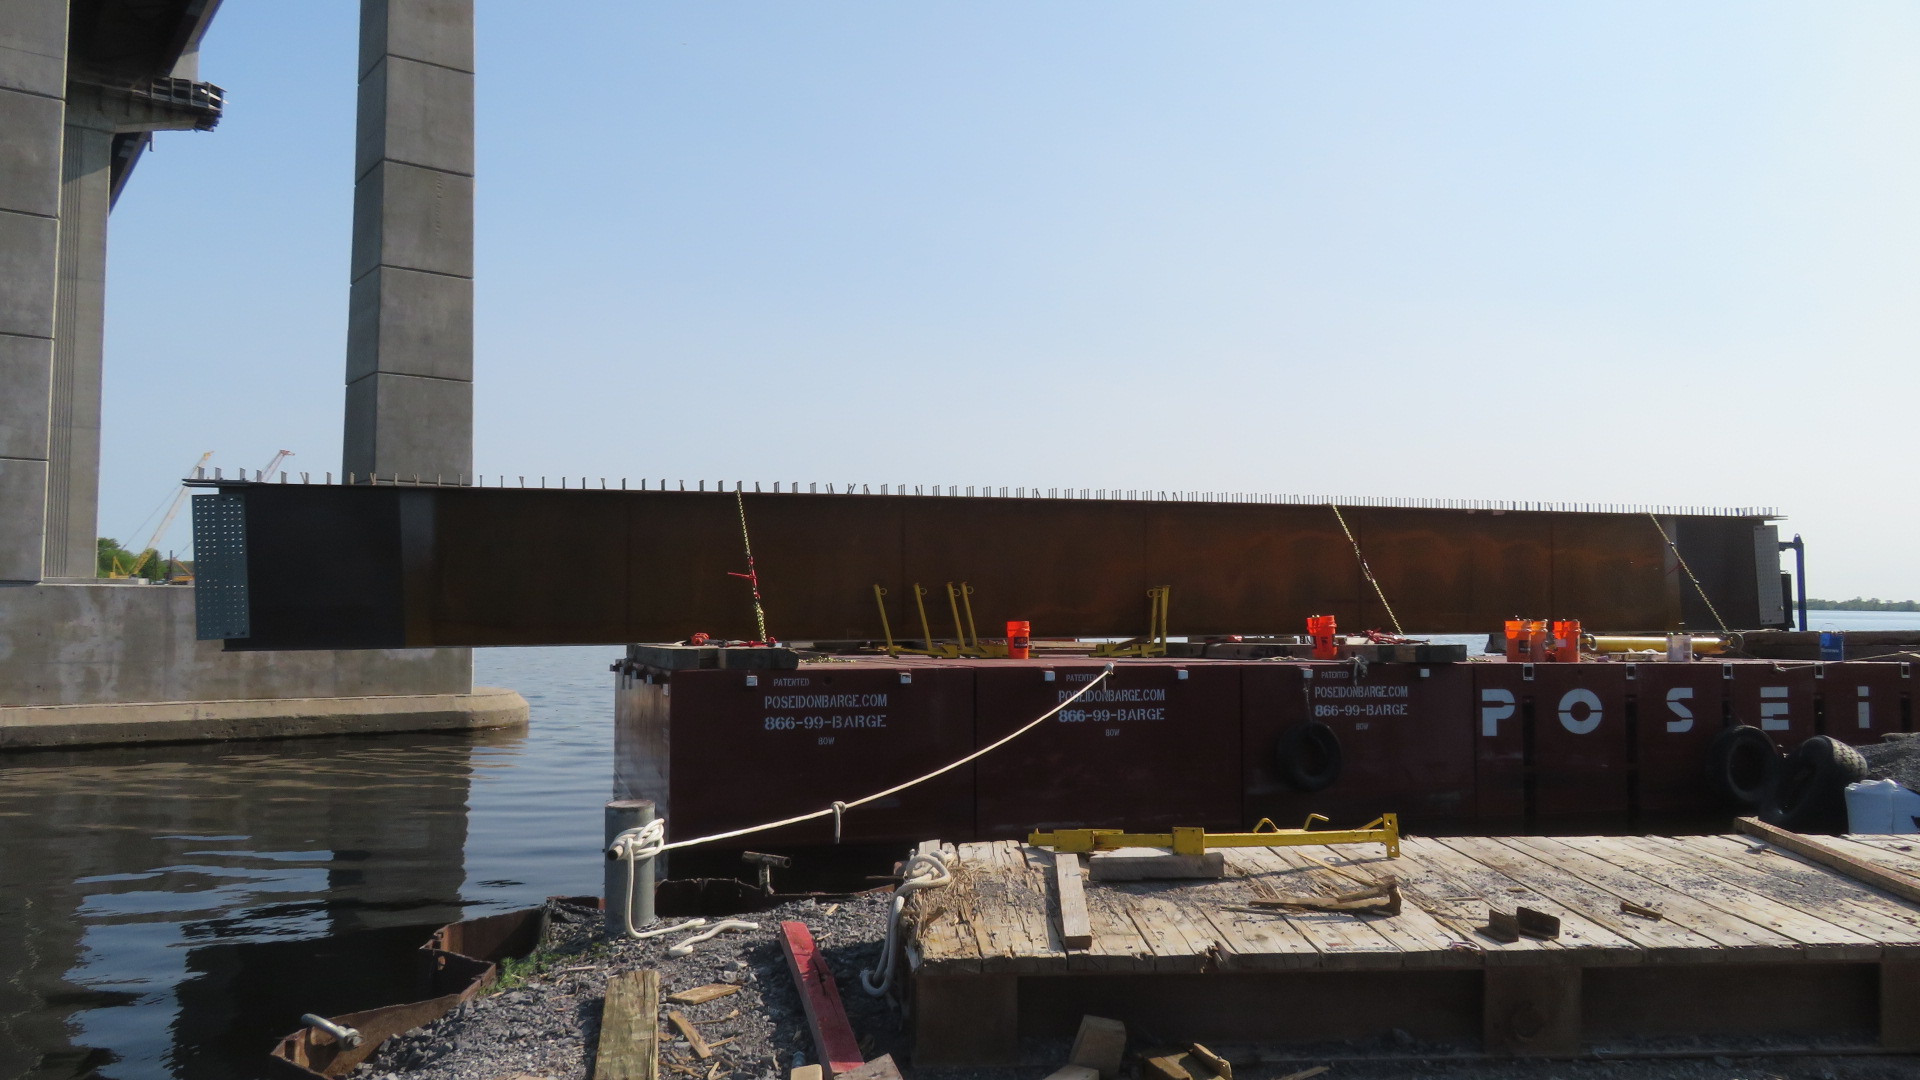 Section of girder on the barge